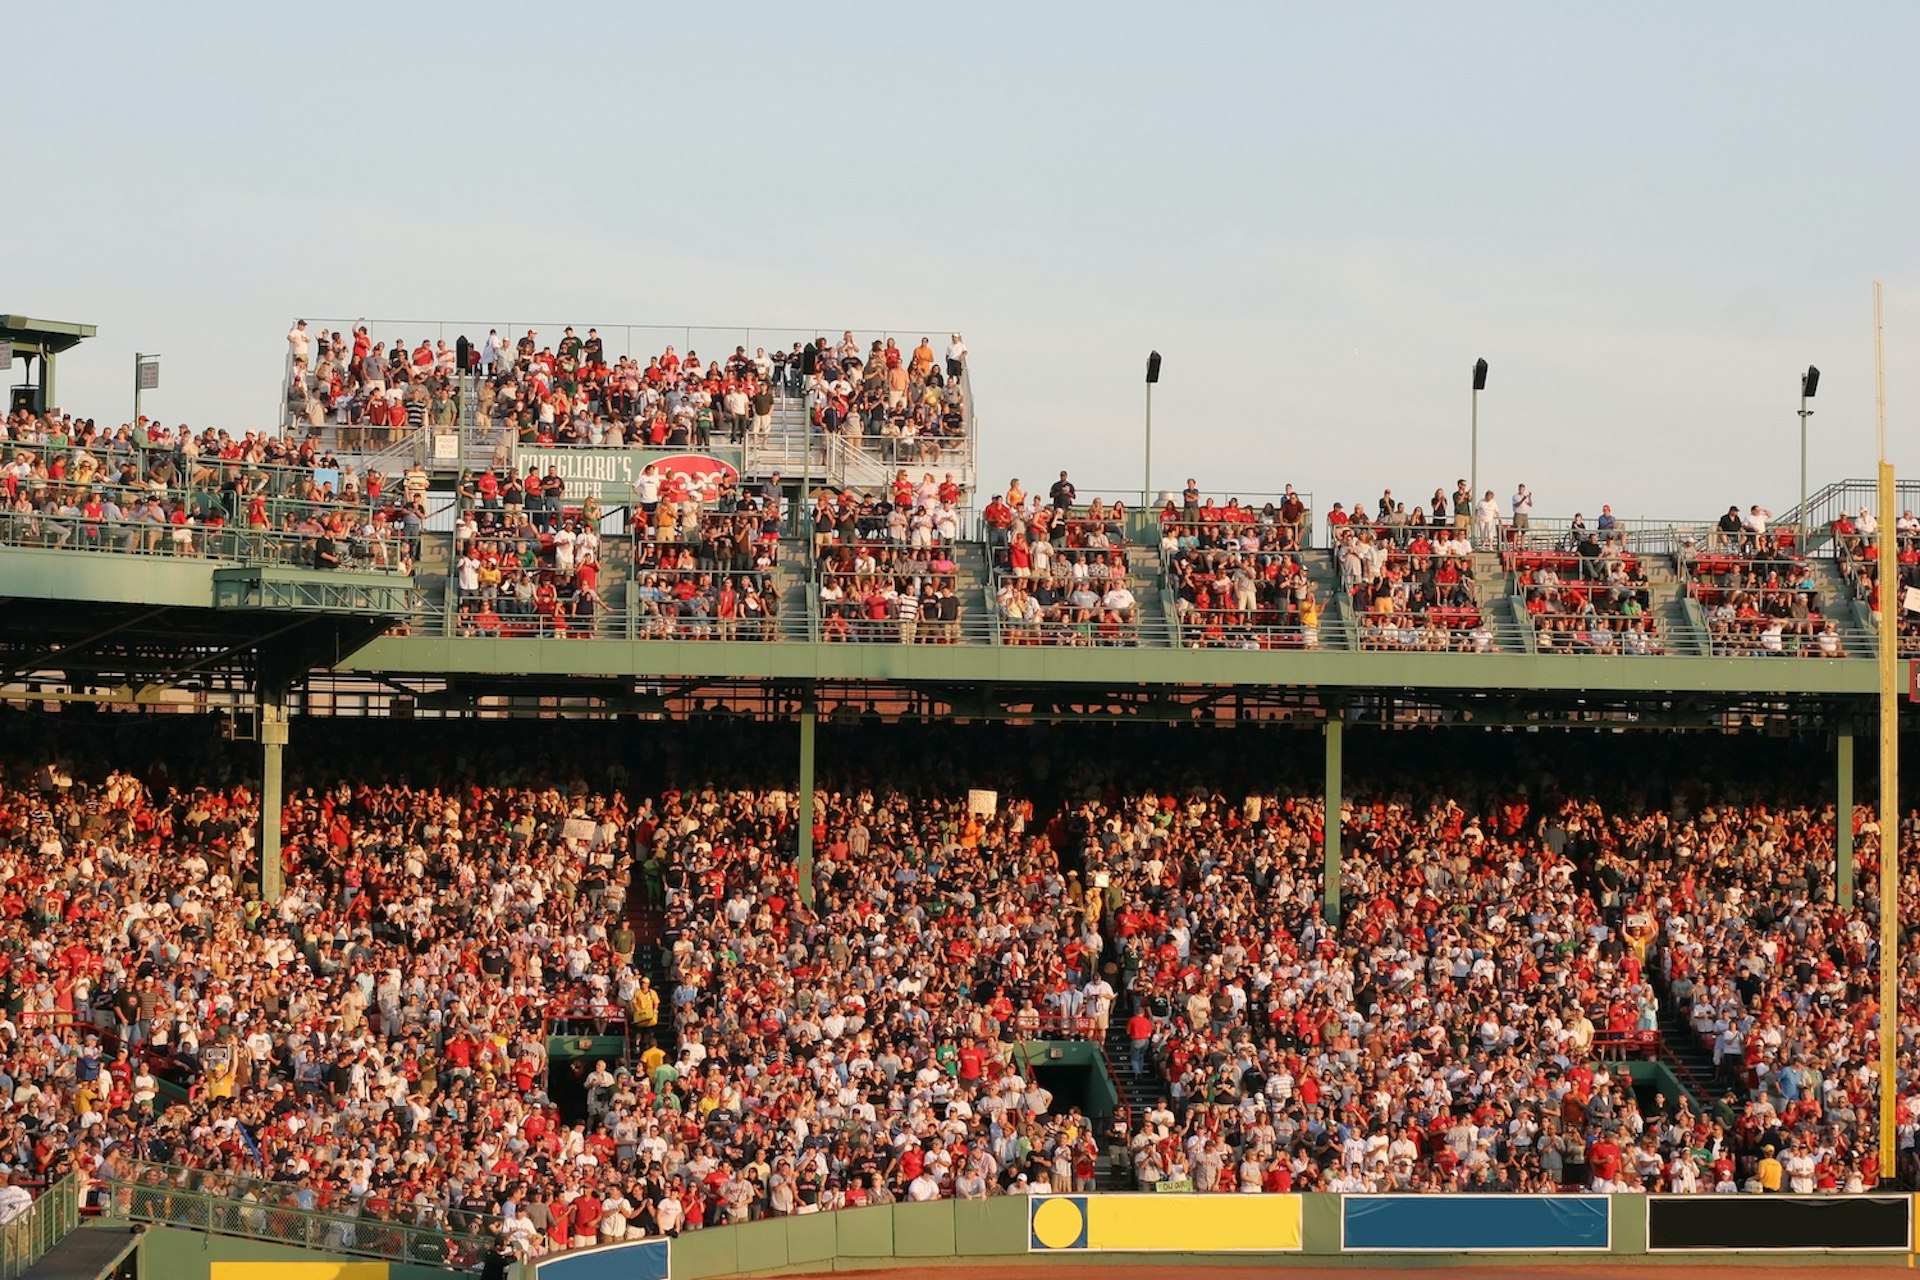 Thousands of baseball fans dressed in red and white fill the stands at a stadium